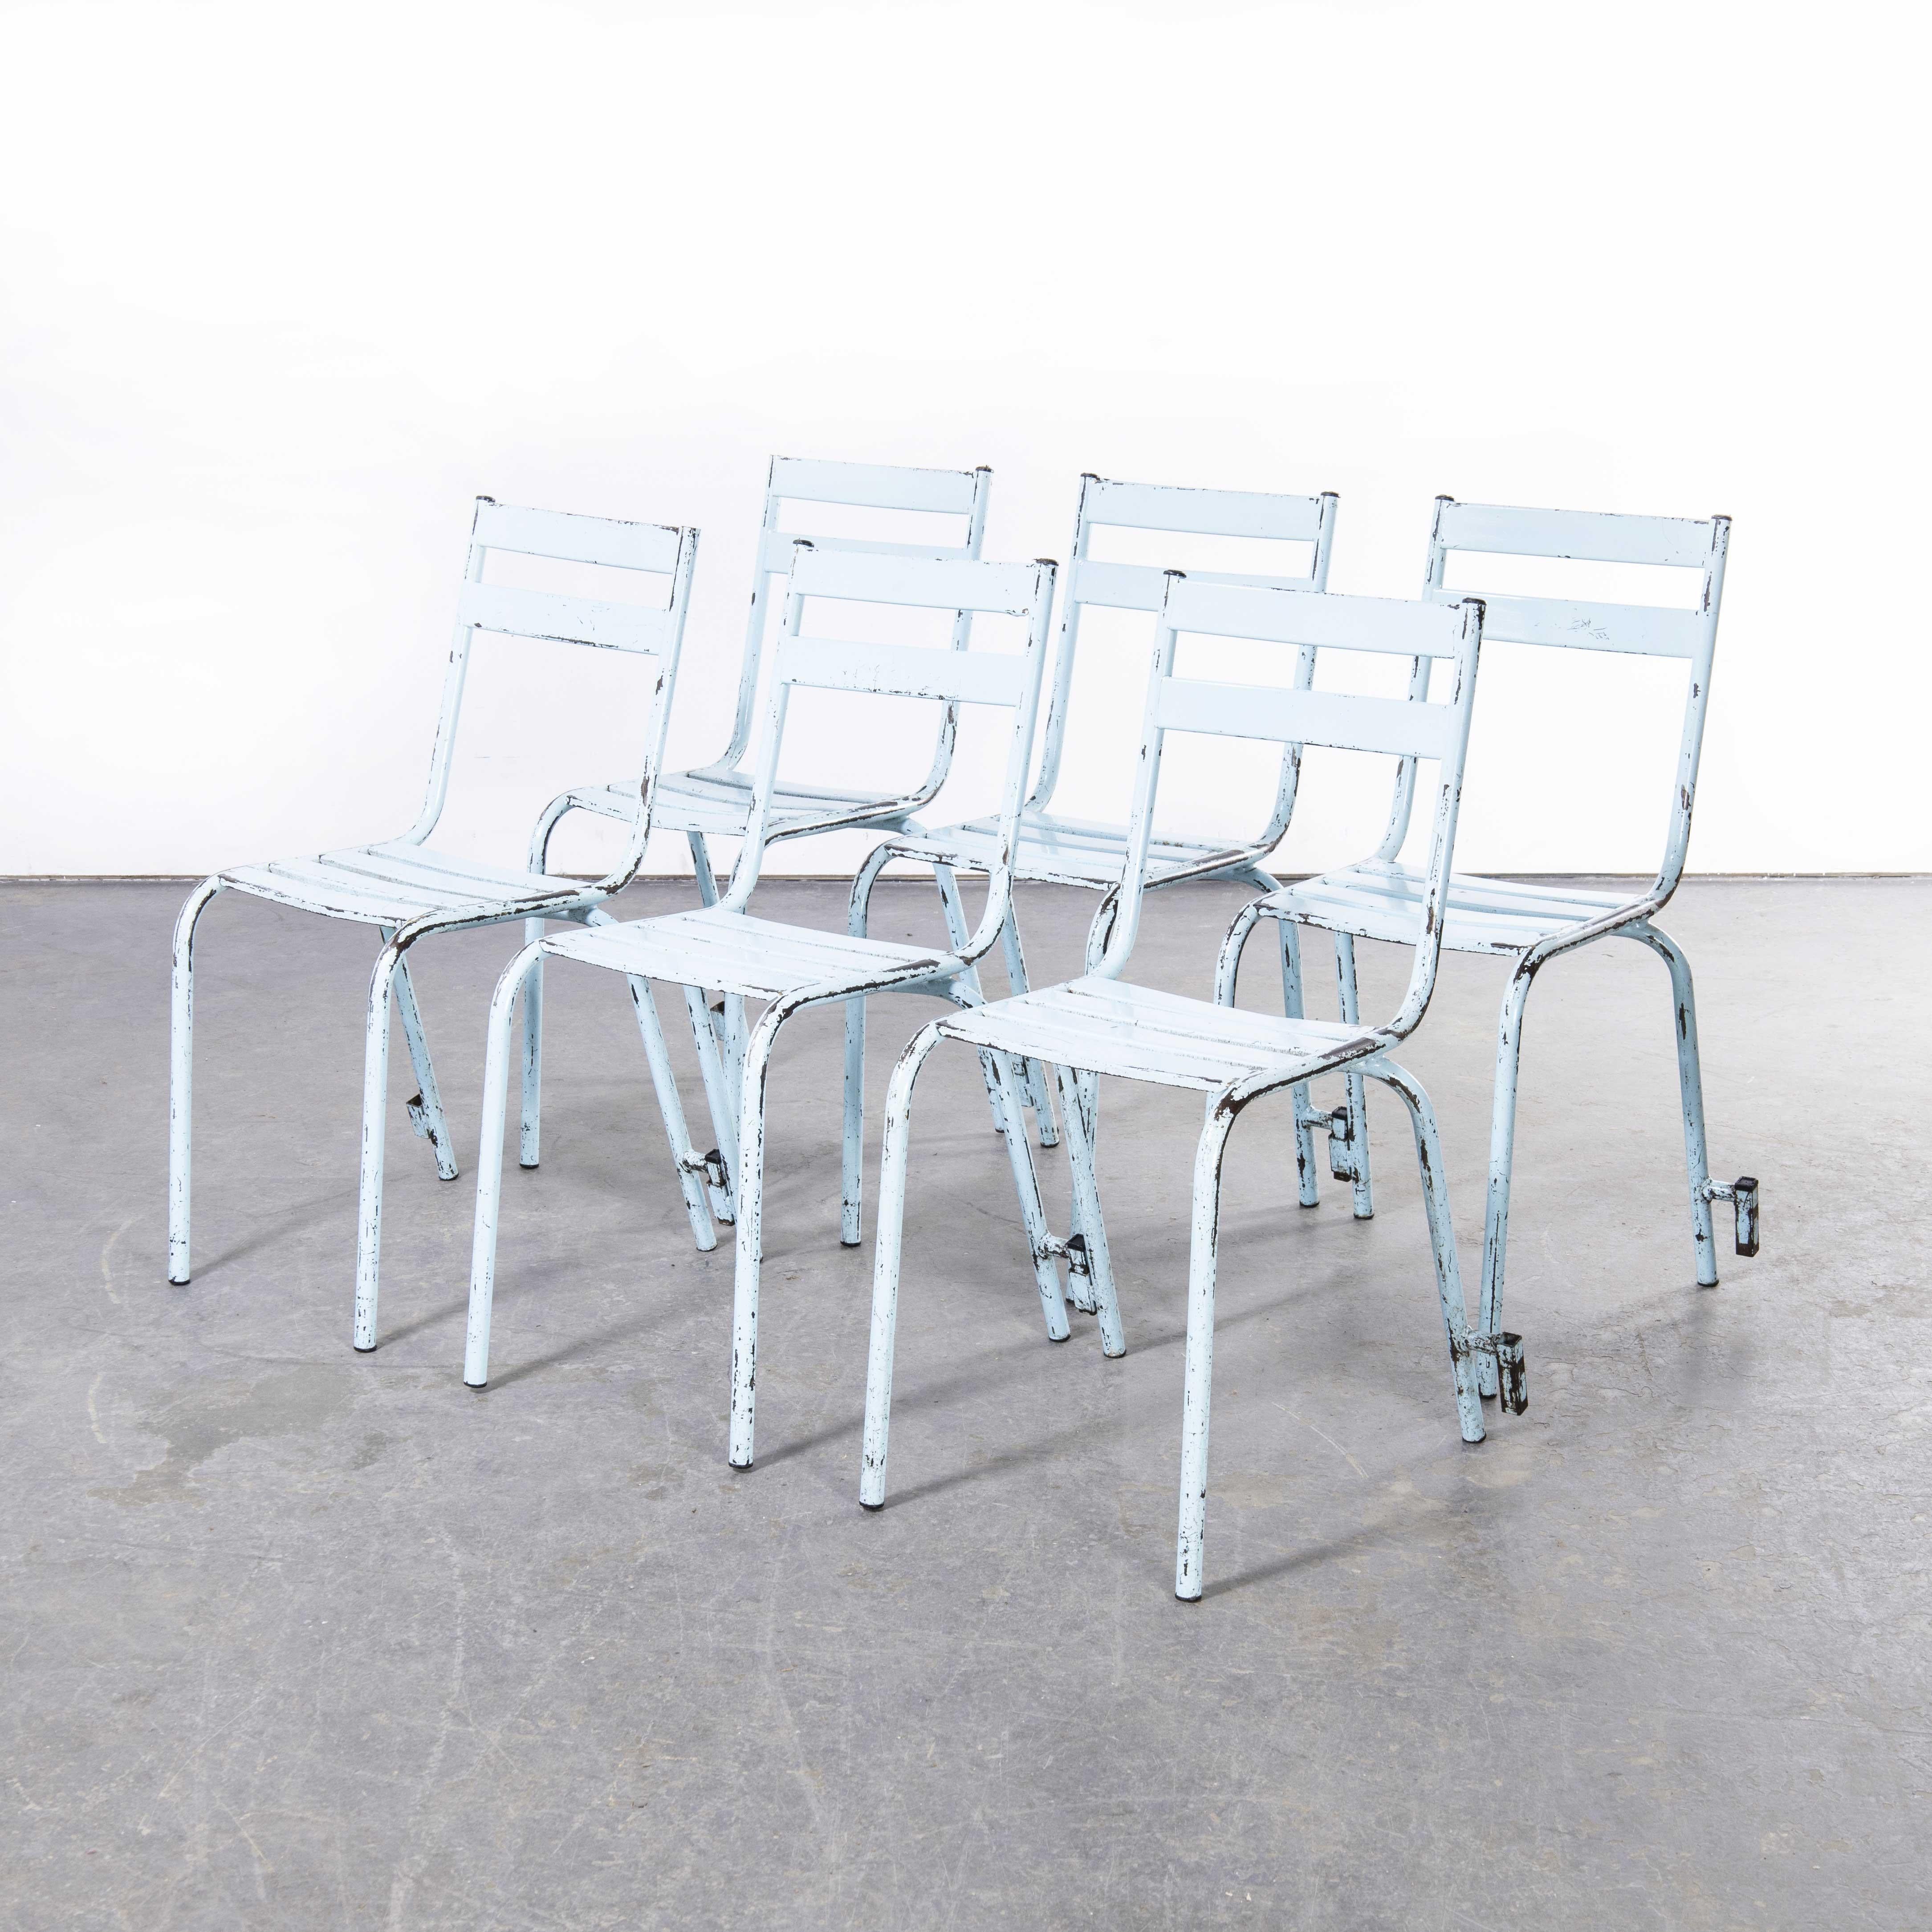 1950s french artprog sky blue metal stacking outdoor chairs – set of six
1950s french artprog sky blue metal stacking outdoor chairs – set of six. Reminiscent of Tolix but not made by Tolix, artprog was a producer in gray in haute saone. Sometimes